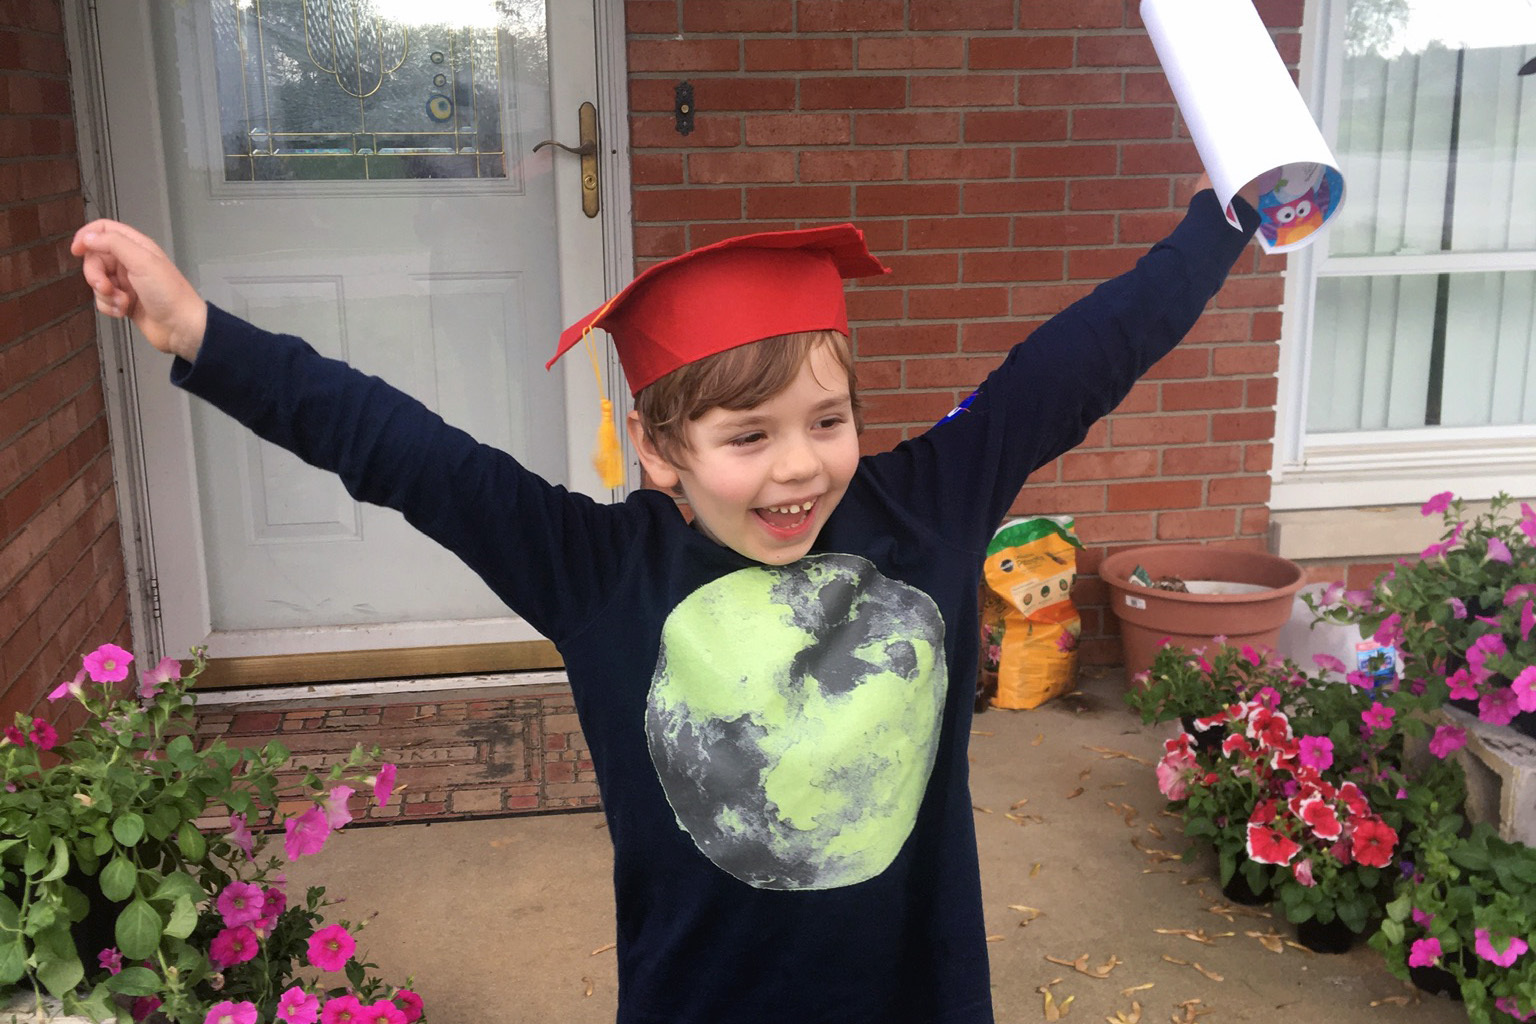 A young boy wears a red graduation cap with his arms outstretched, and a look of absolute glee across his face. Suzanne Godby Ingalsbe's son Nicholas graduated from kindergarten in the spring 2020 and started first grade remotely this year. He likes playing games with his friends online, but misses things like summer camp and spending time with friends on the bus. Provided by Suzanne Godby Ingalsbe.